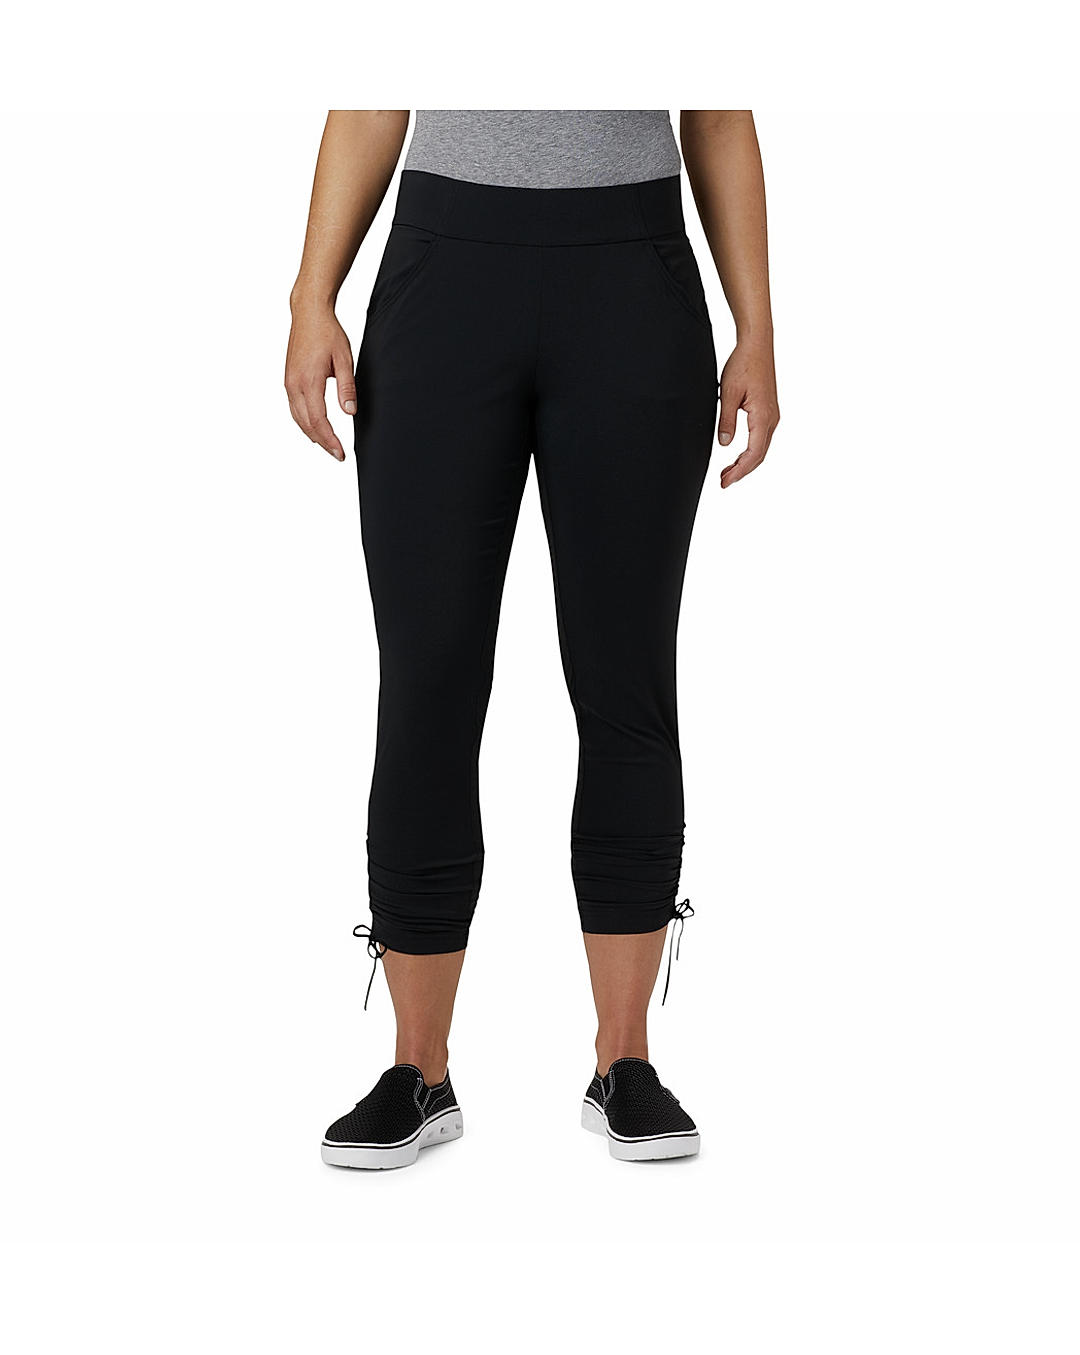 Buy Black Anytime Casual Pull On Pant for Women Online at Columbia